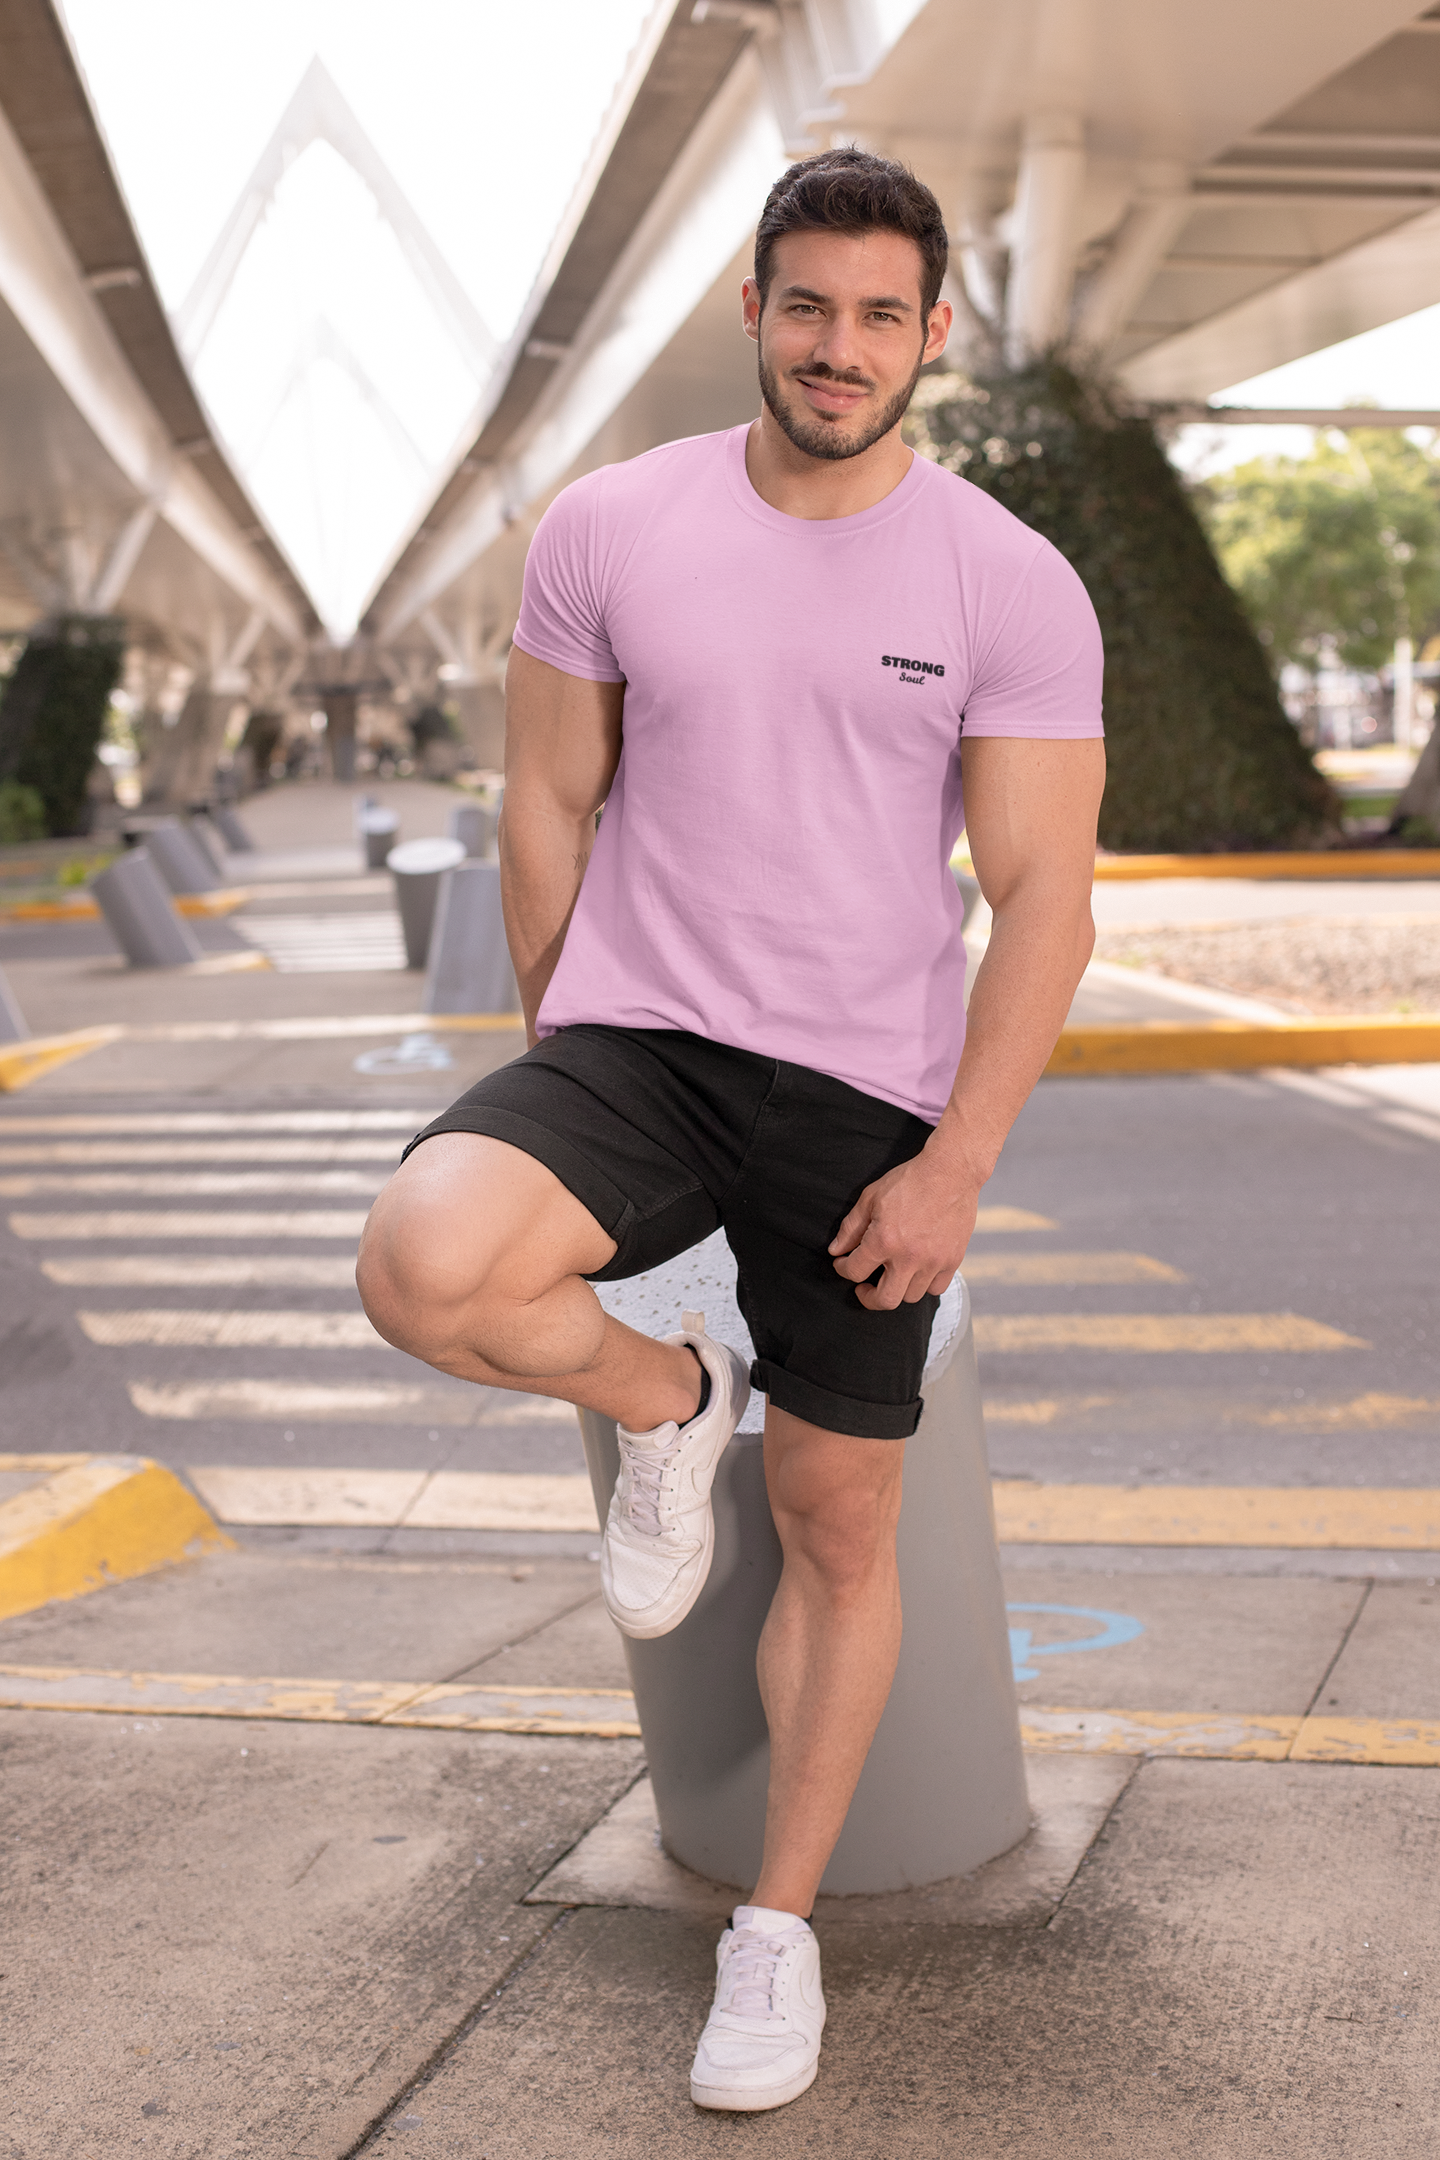 Pink Solid - Gym T Shirt Strong Soul Shirts & Tops